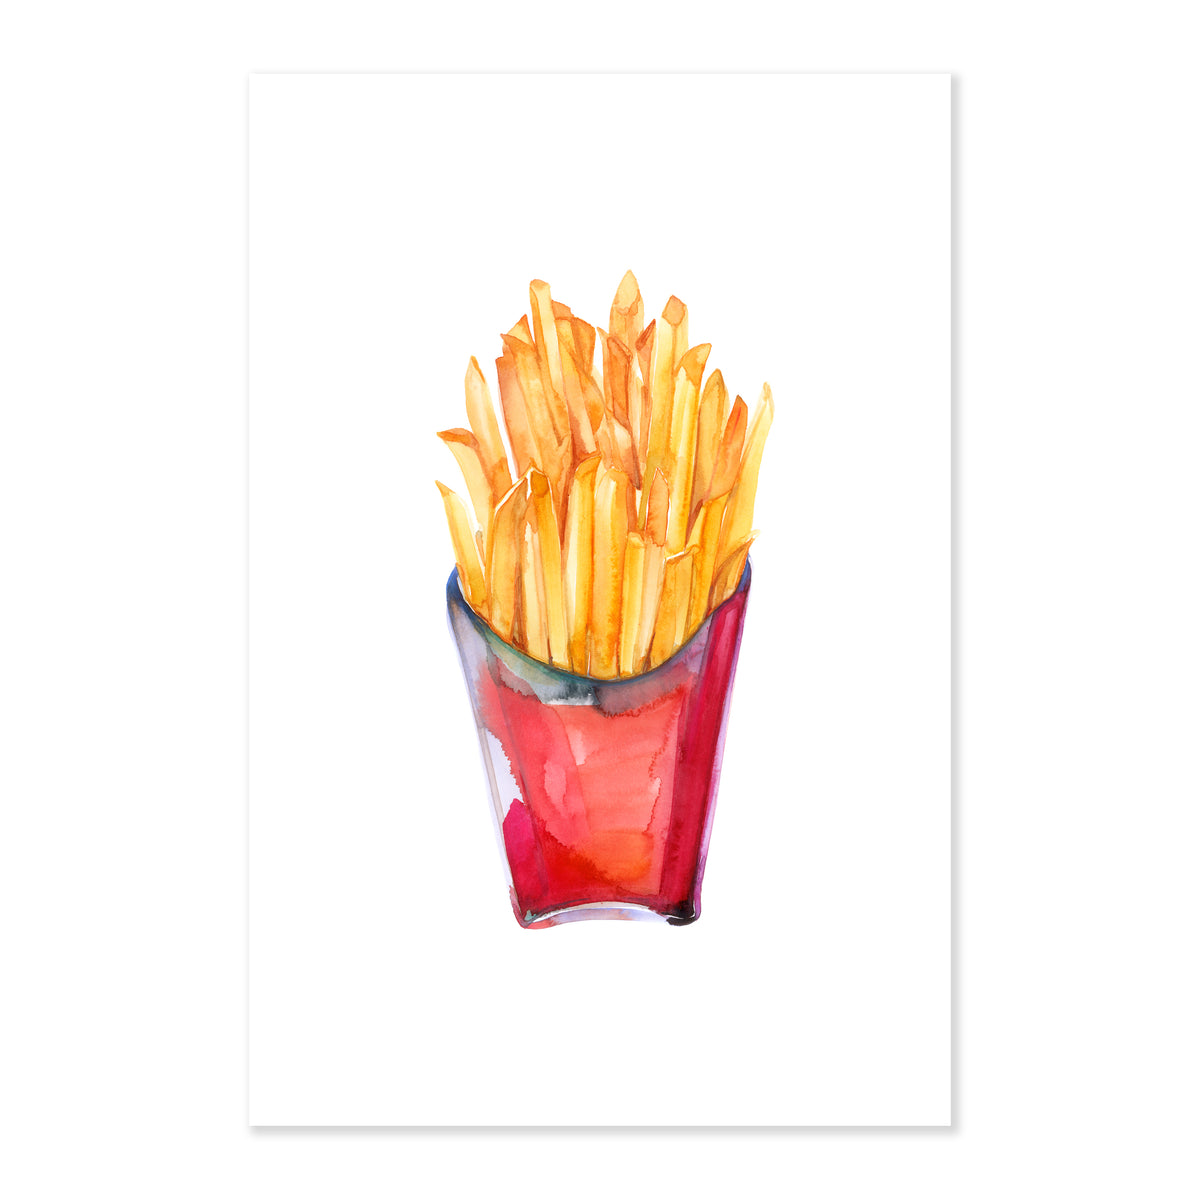 A fine art print illustrating yellow golden thin cut french fries in a red carton container painted with watercolors on a soft white background